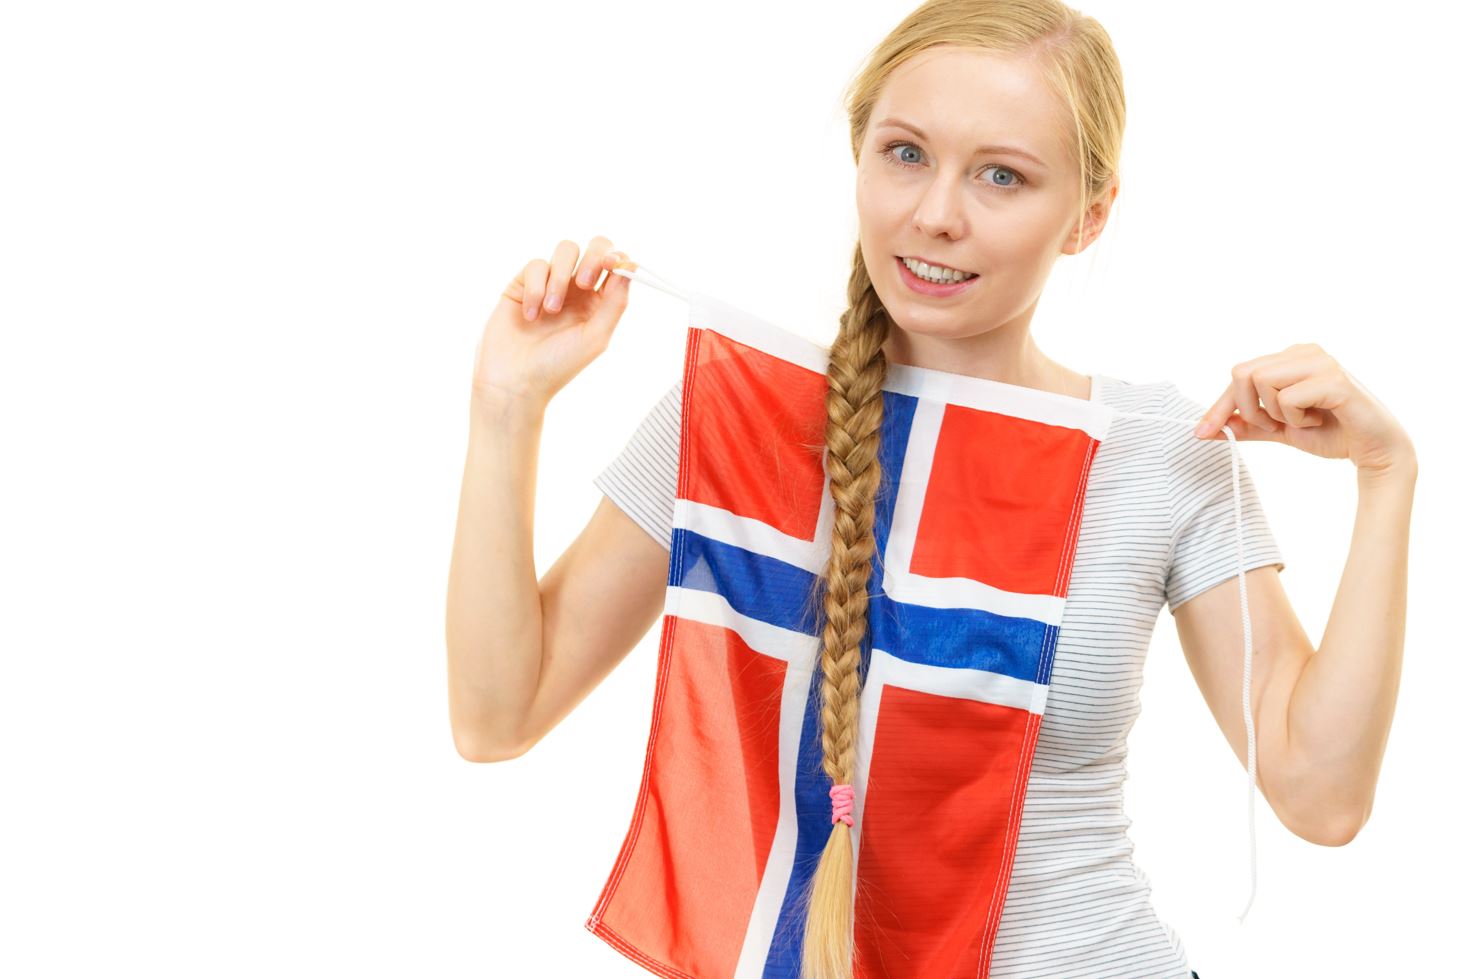 A Norwegian girl with her nation’s flag